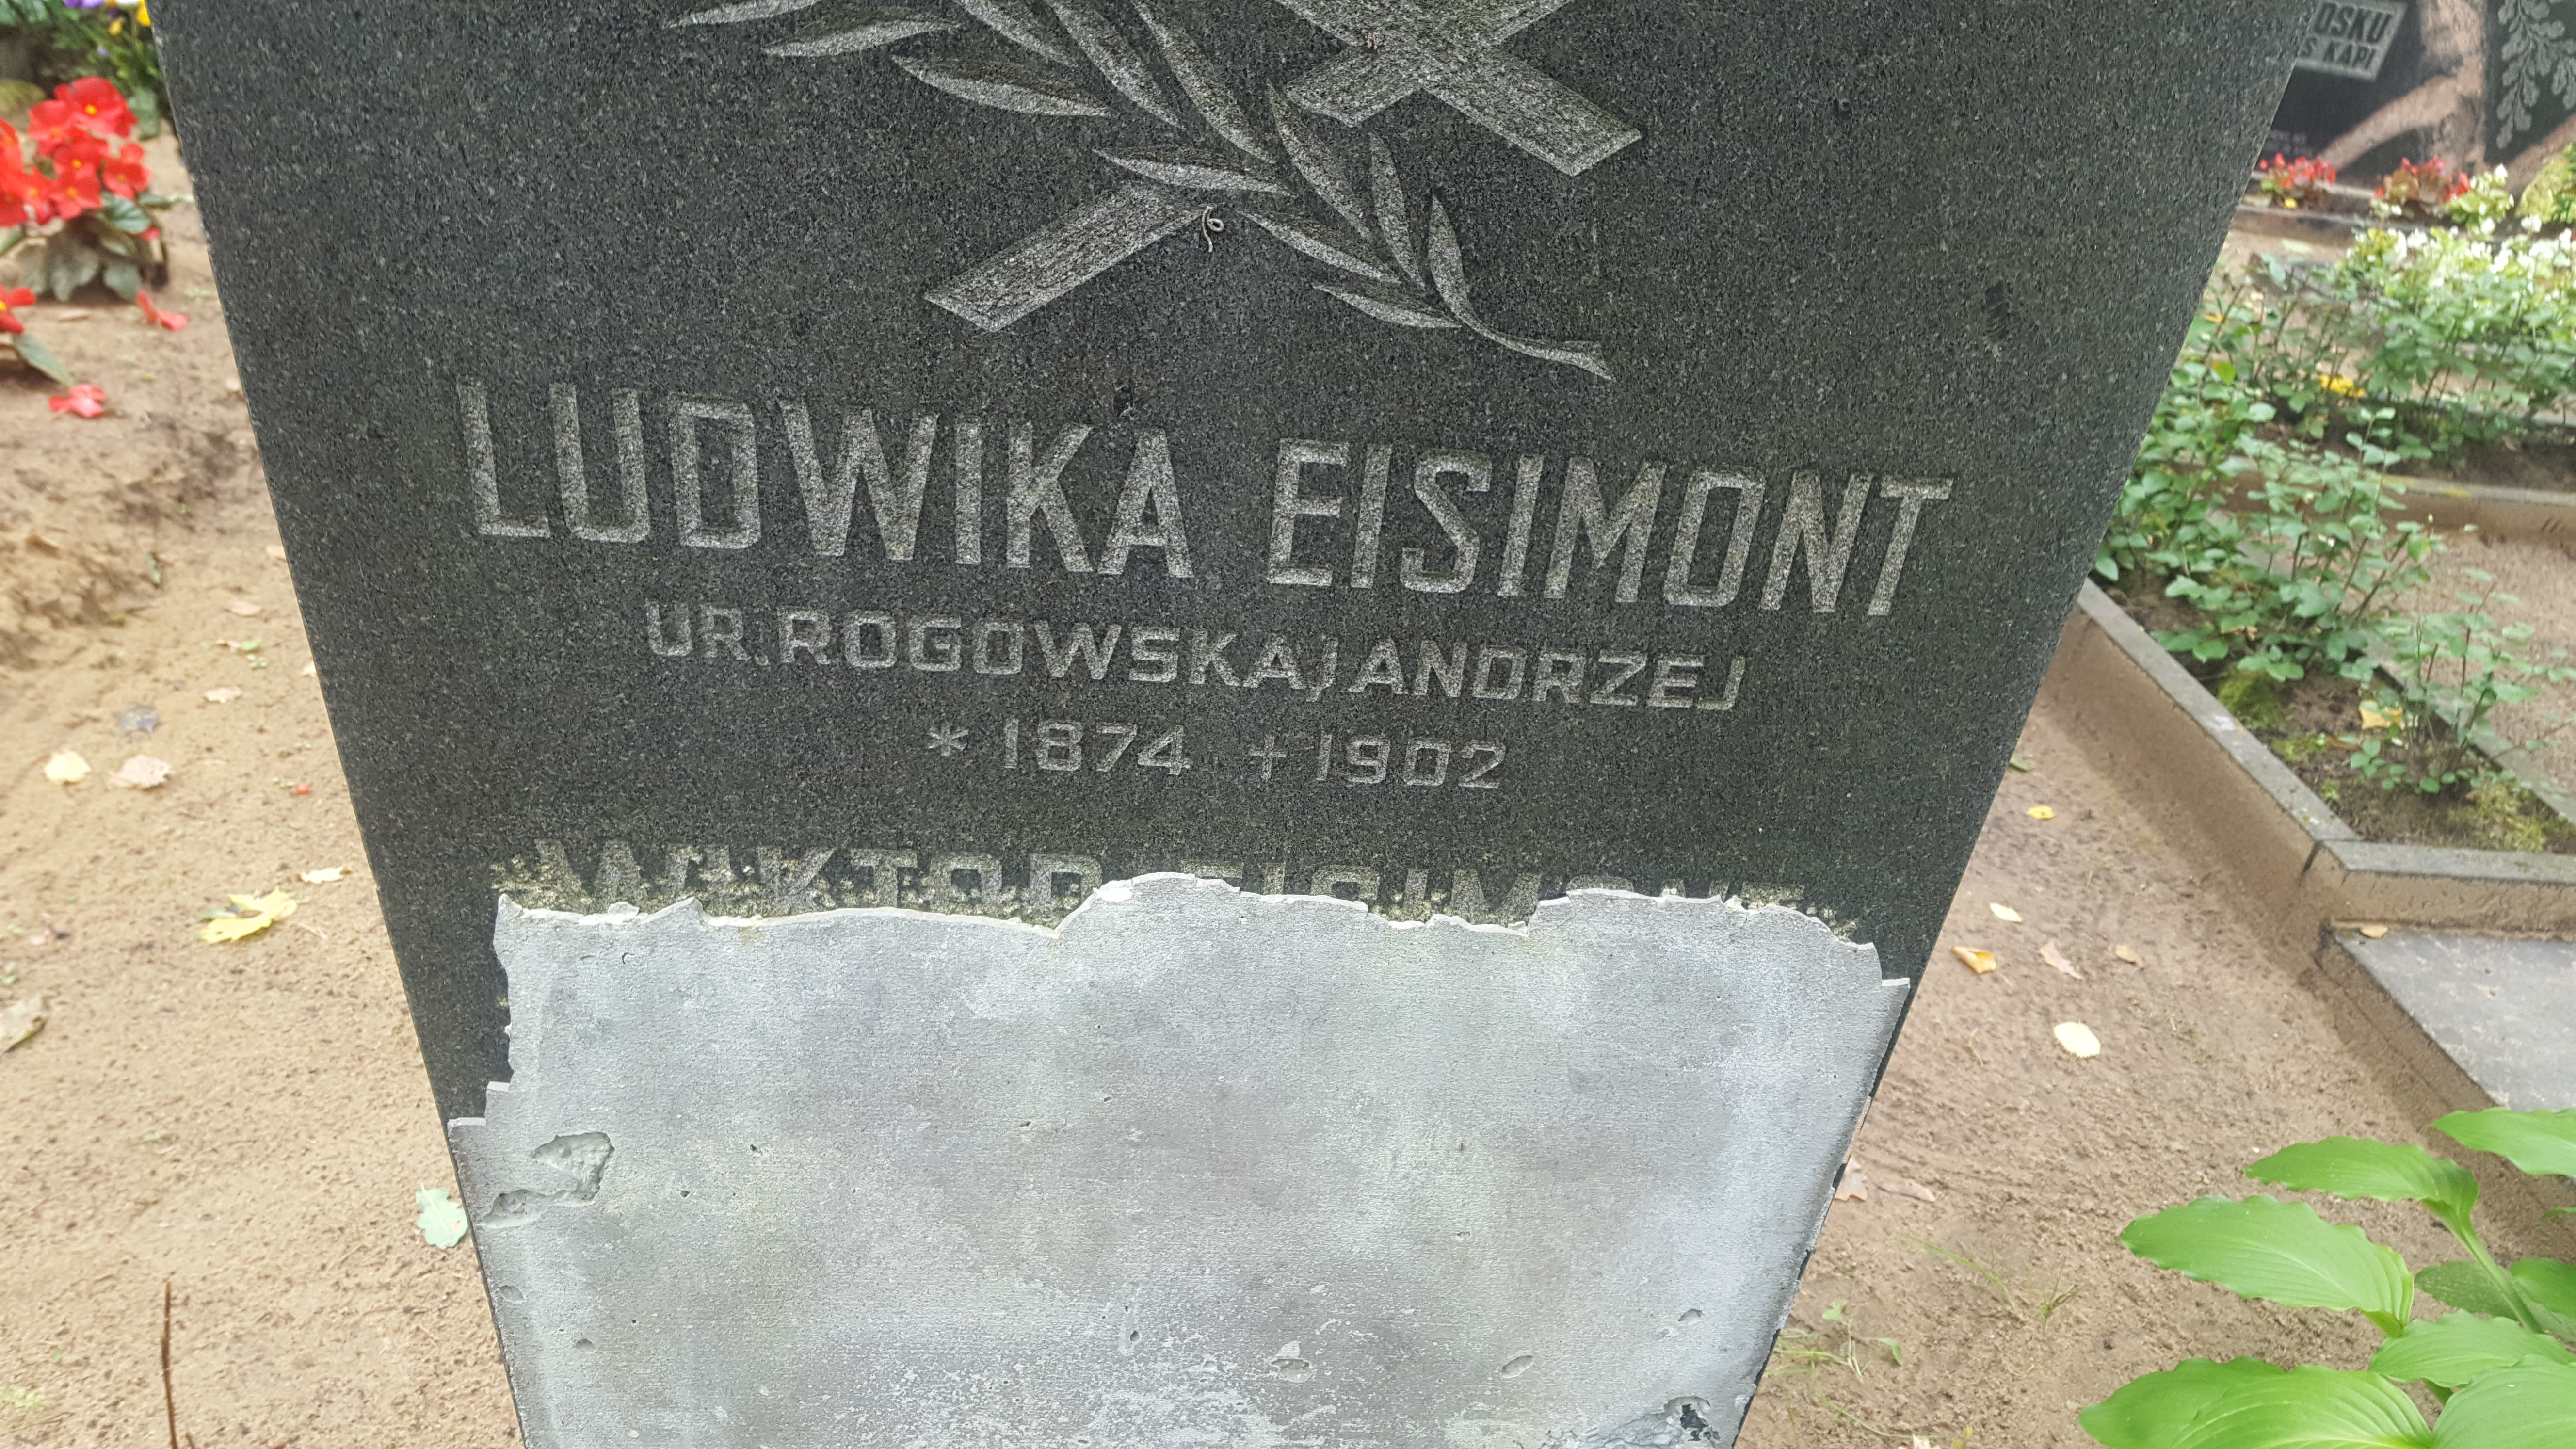 Inscription from the tombstone of Andrew, Ludwika, Victor Eisimont St Michael's cemetery in Riga, as of 2021.